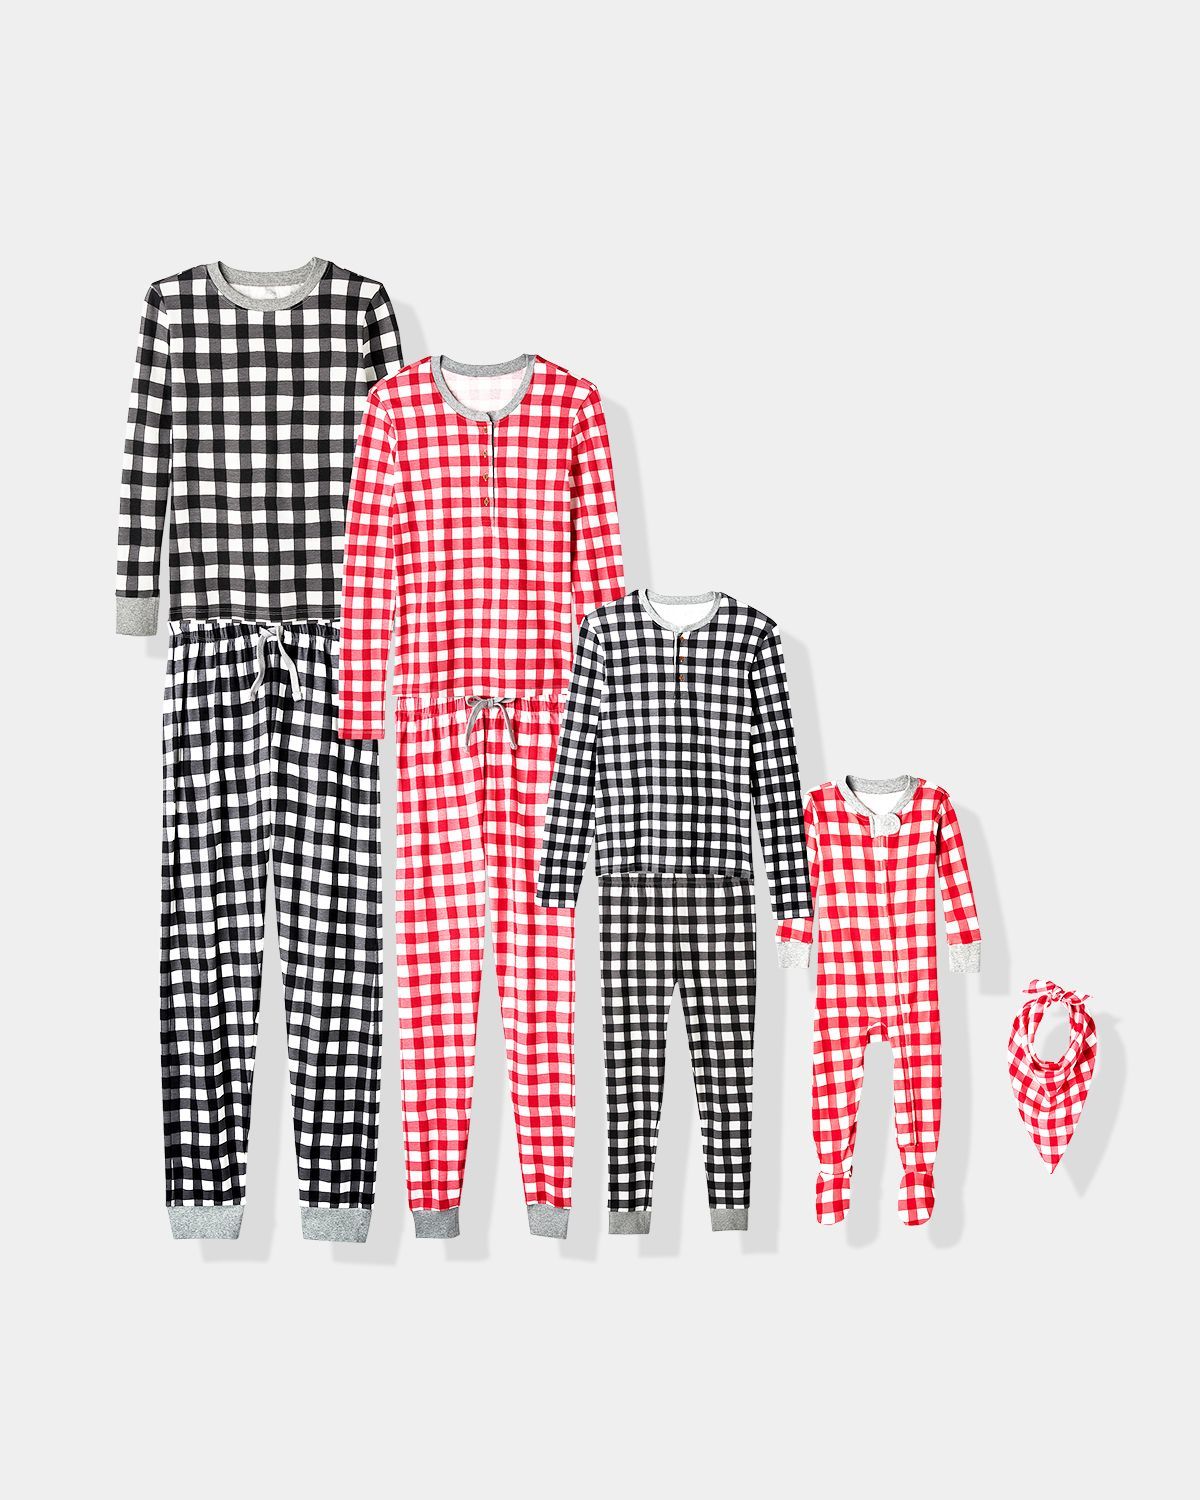 Honest Baby Clothing Organic Cotton Pajamas for the Family